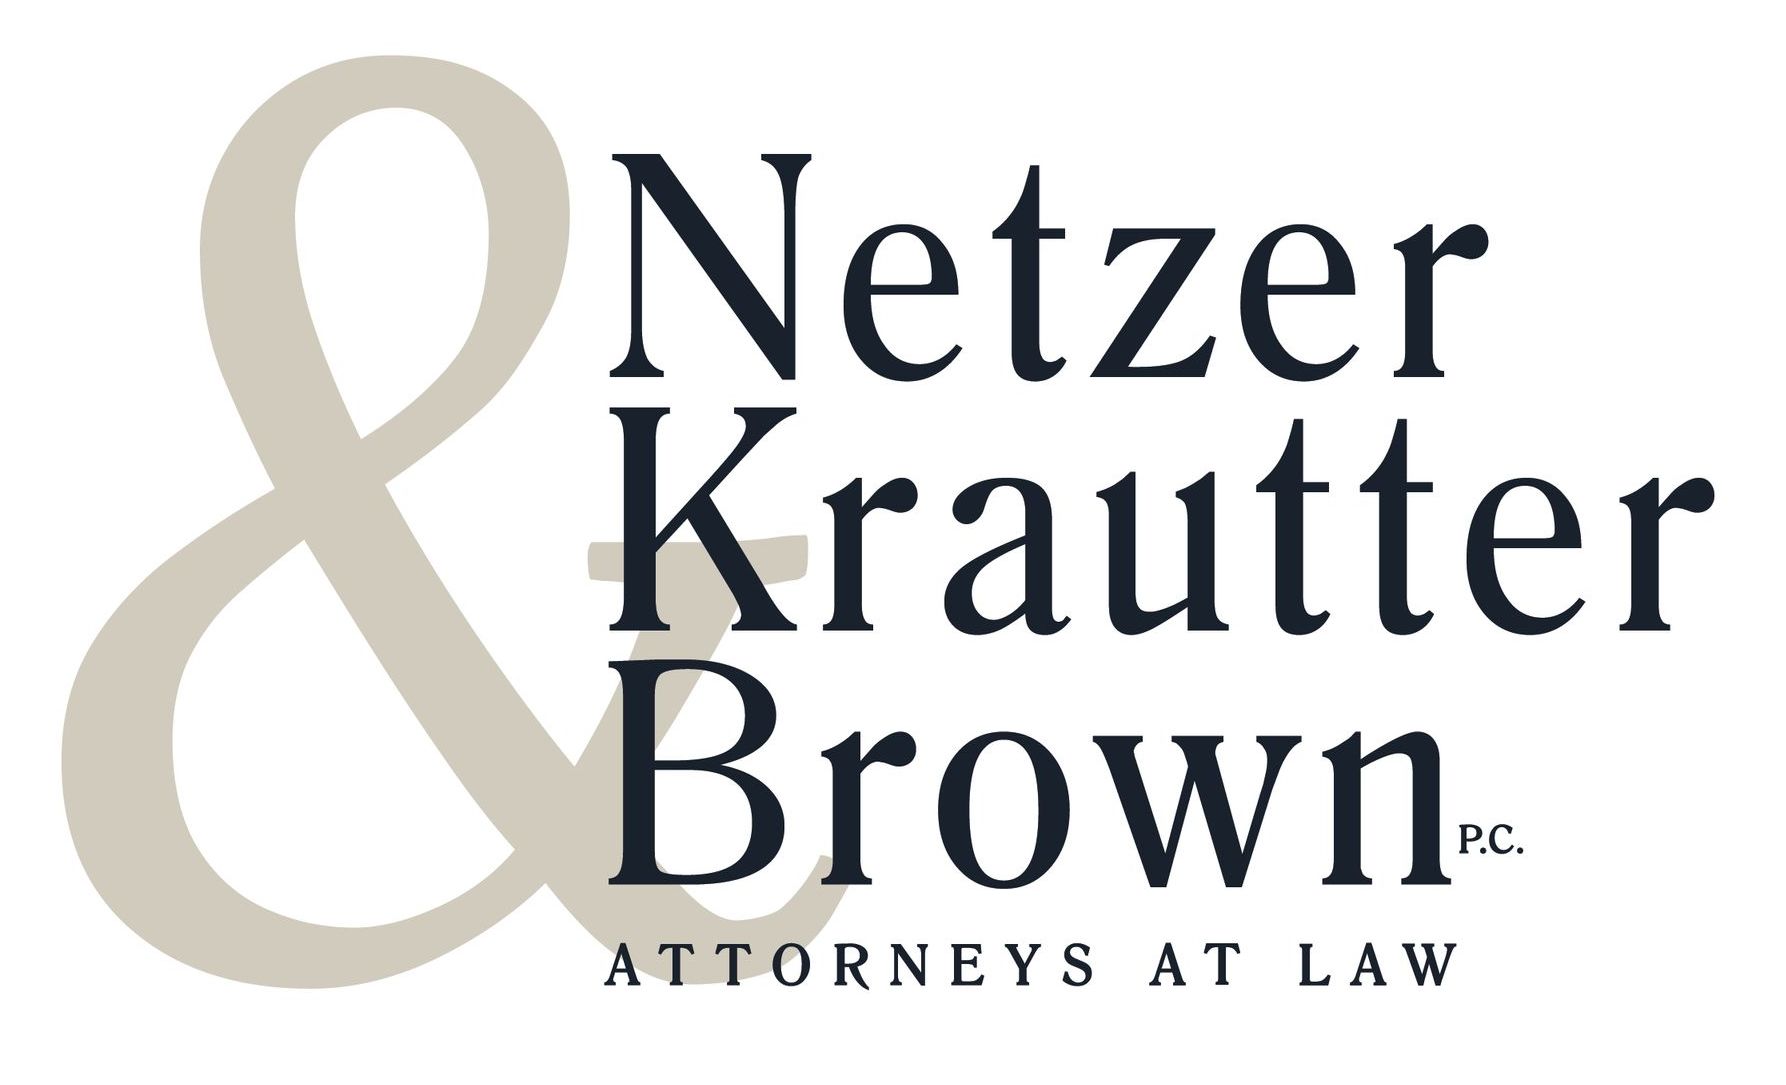 The logo for Netzer, Krautter, & Brown Attorneys at Law.